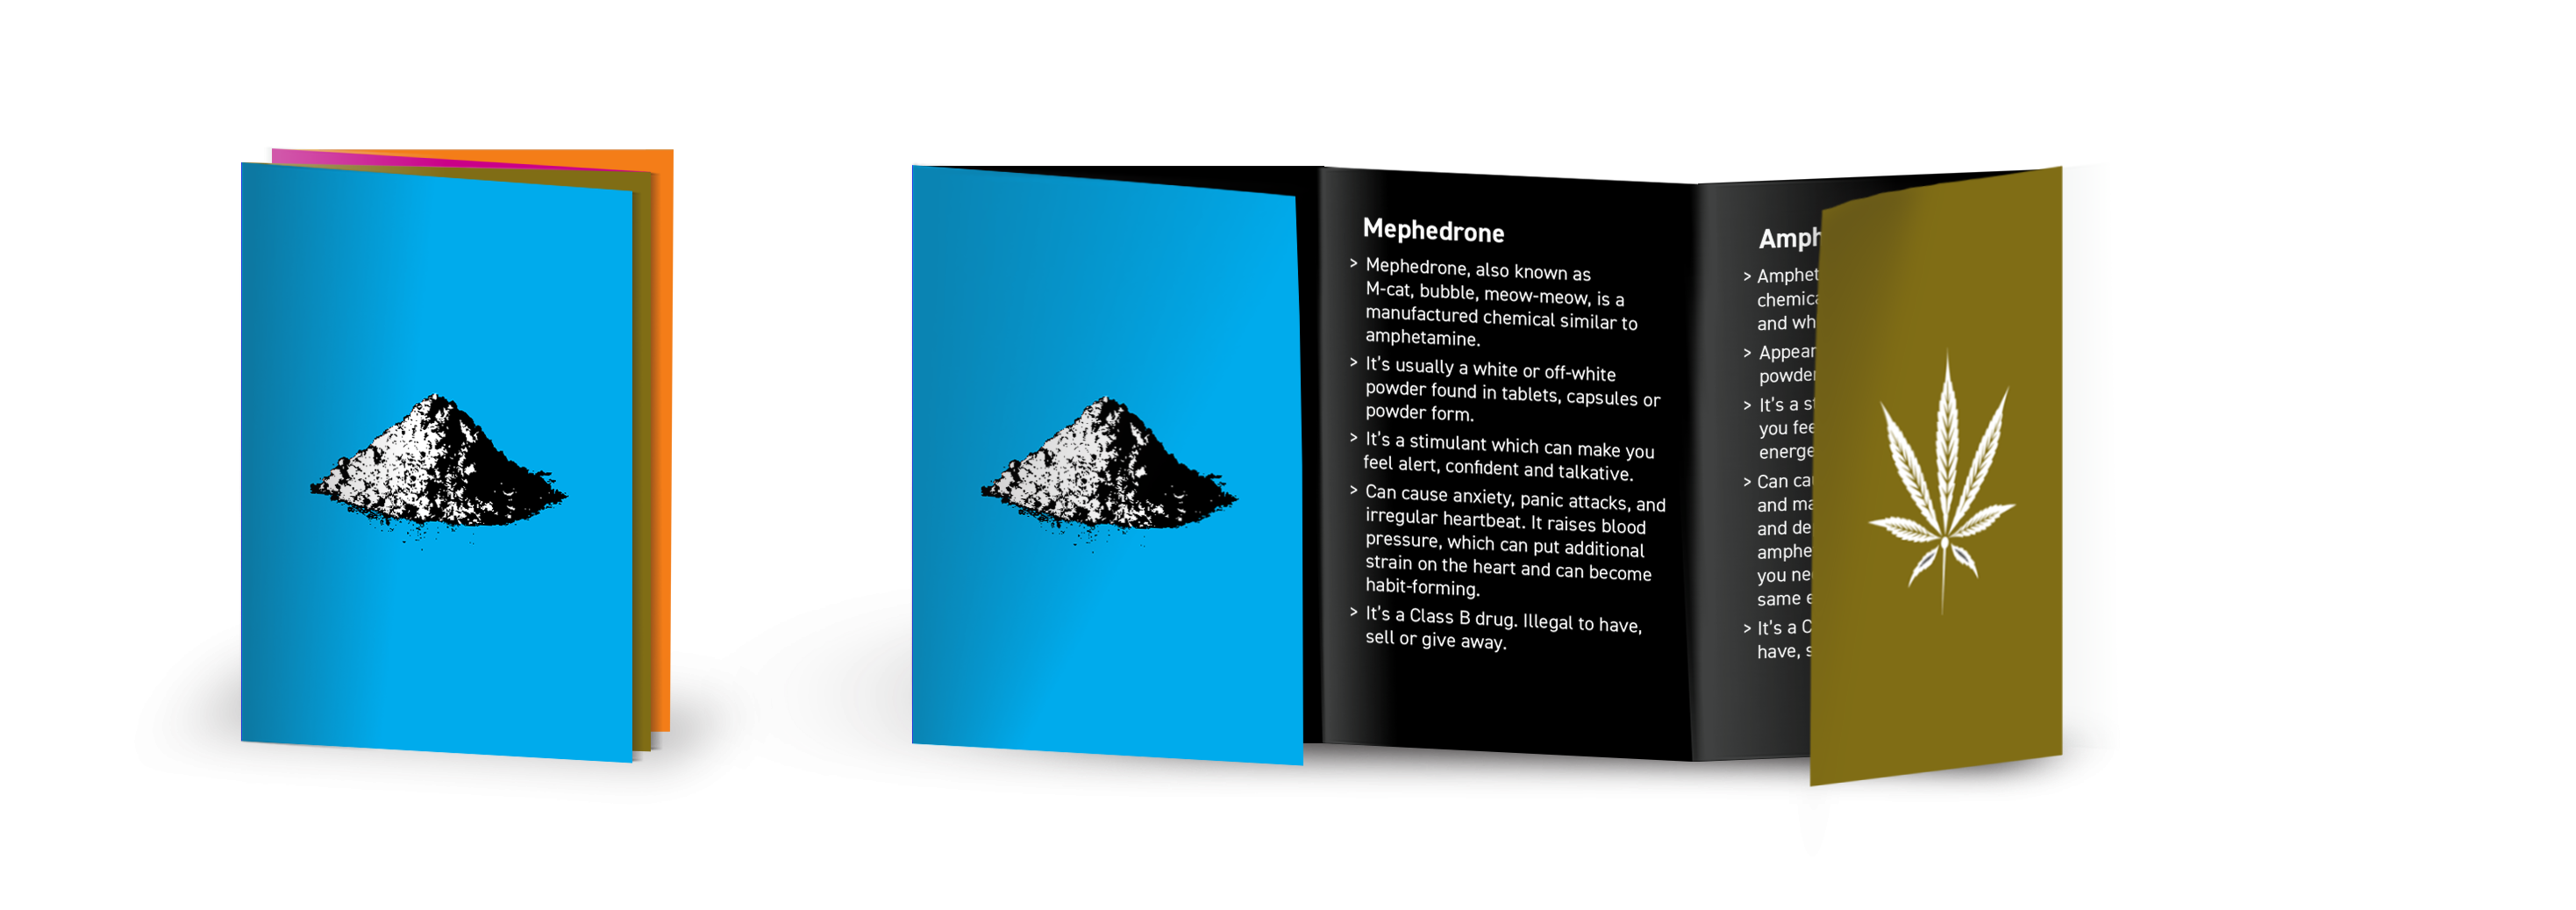 Cover and inside pages of drug awareness leaflet, showing a pile of ampheatamine, and the coy for mephedrone, Amphetamine and cannabis advice.